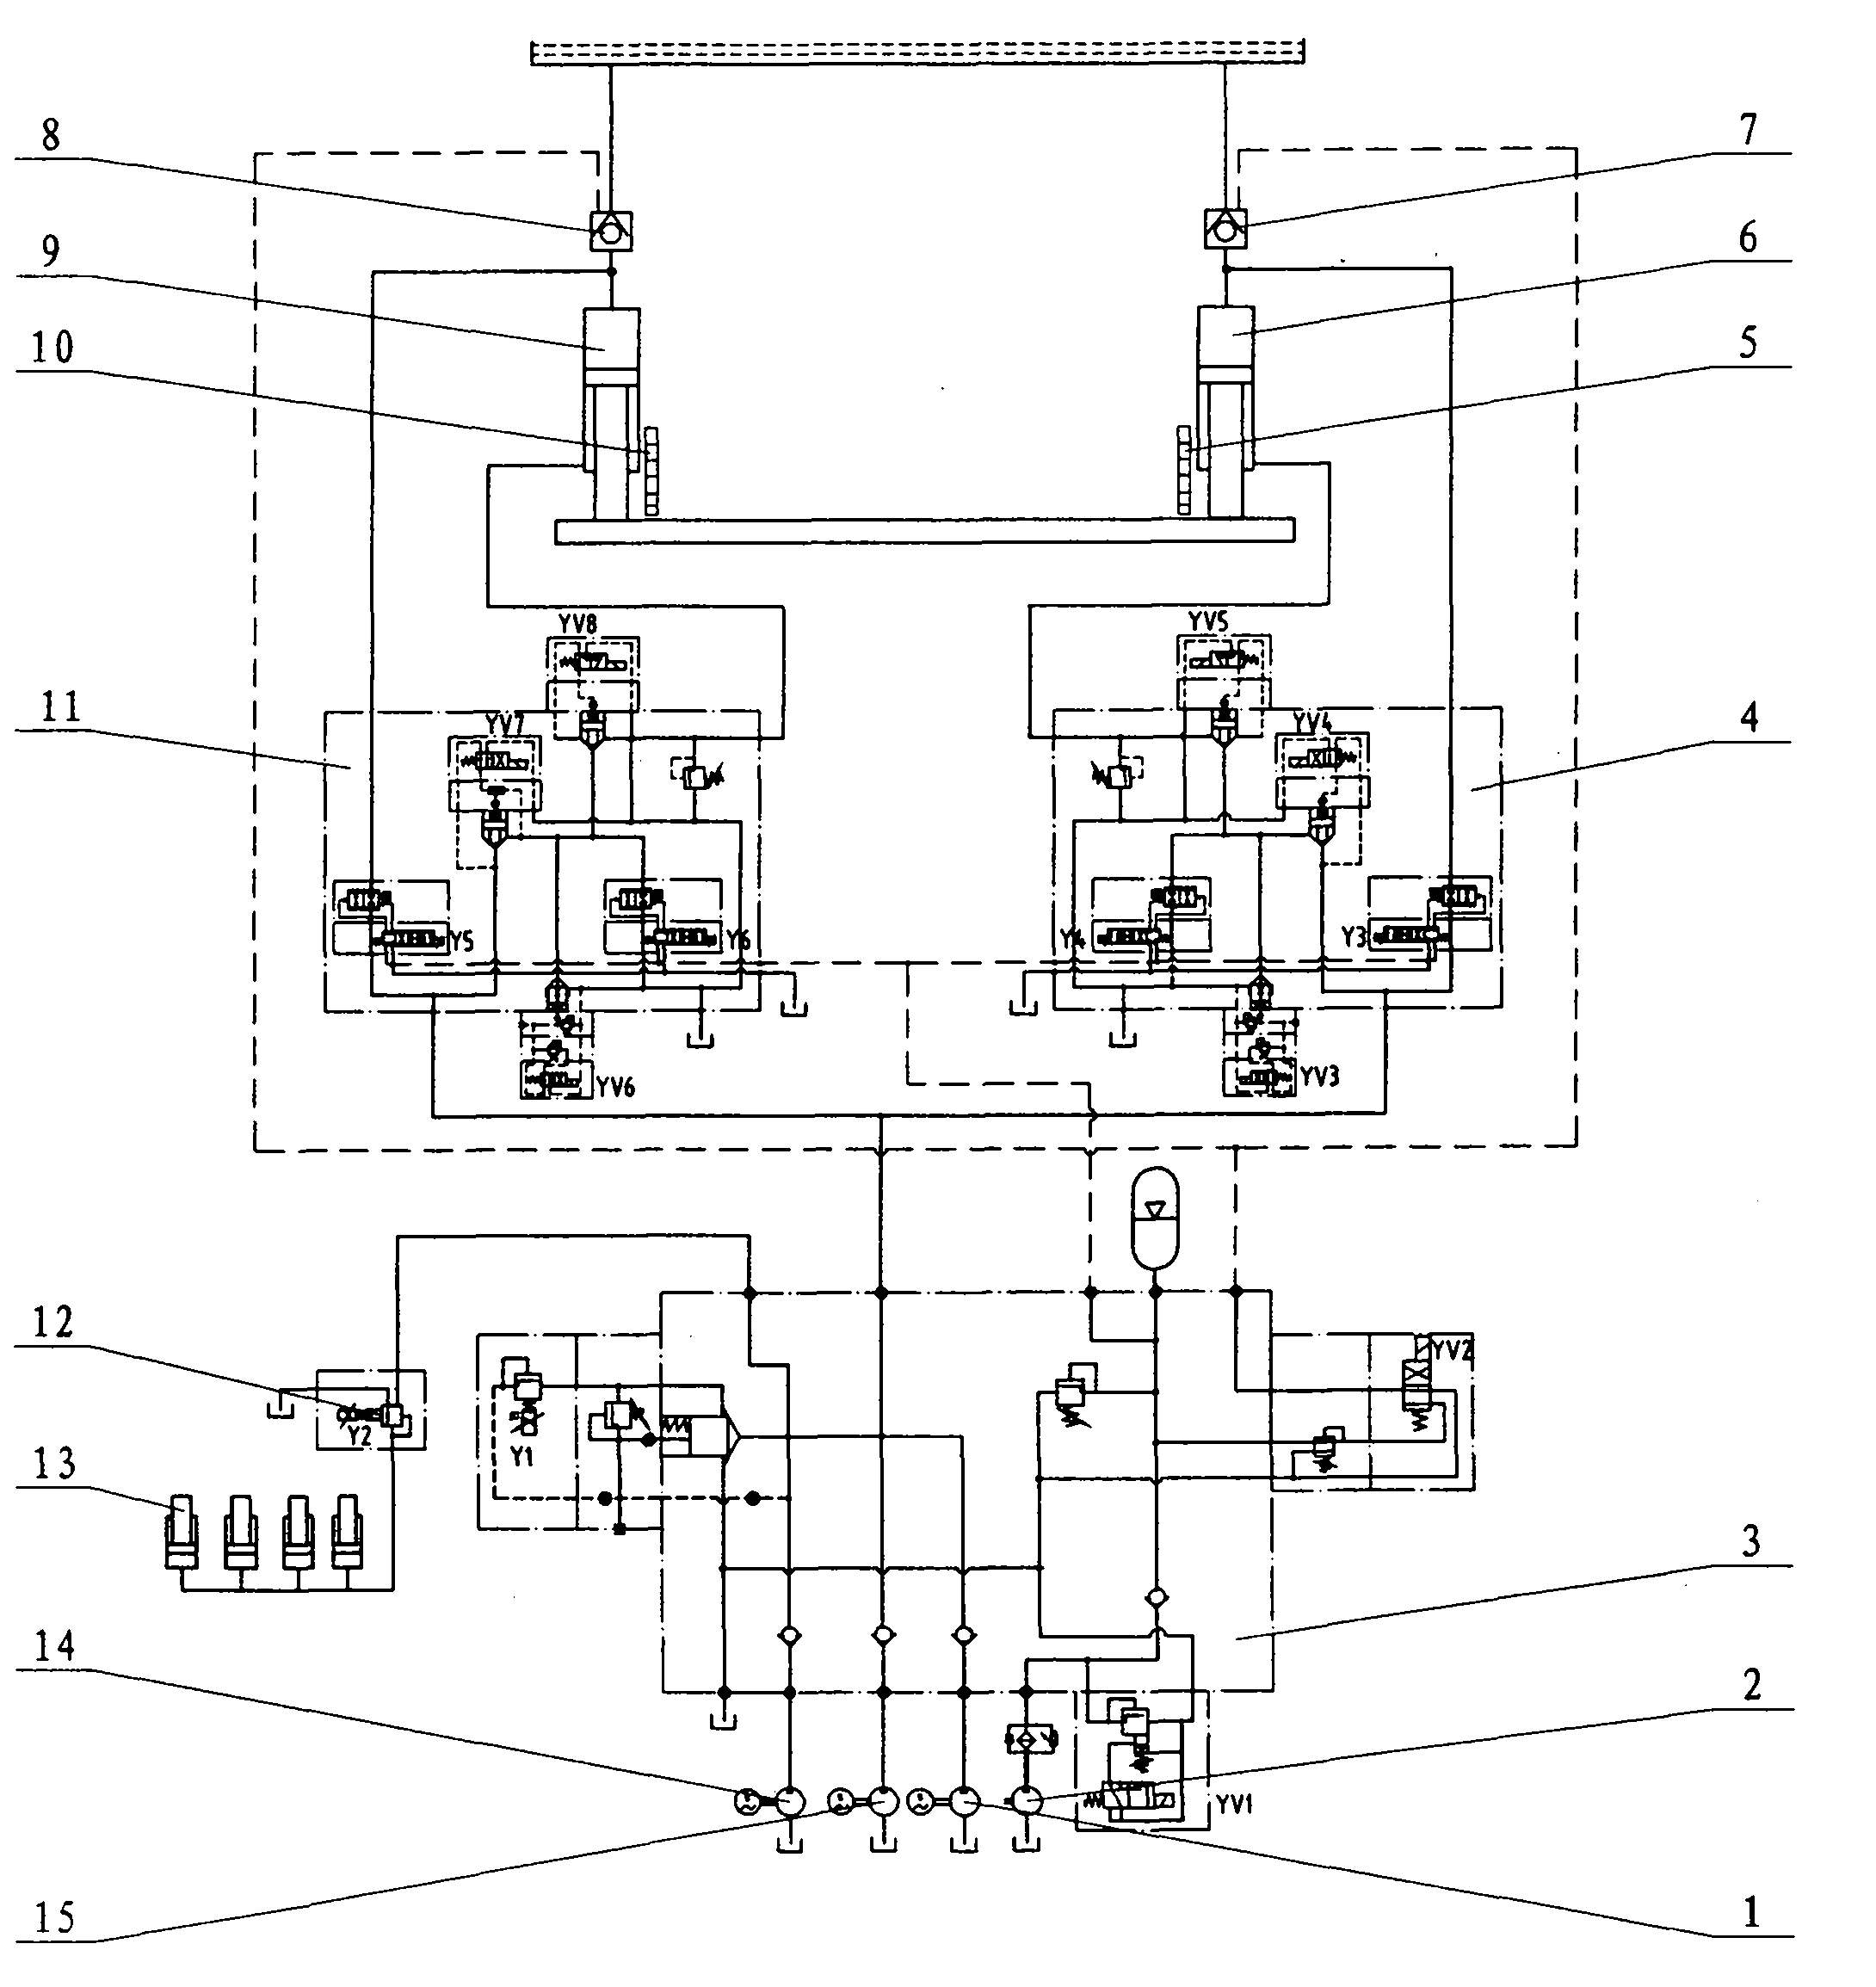 Hydraulic control system with double-feedback active proportional servo cartridge valve for CNC (Computer Numerical Control) bending machine